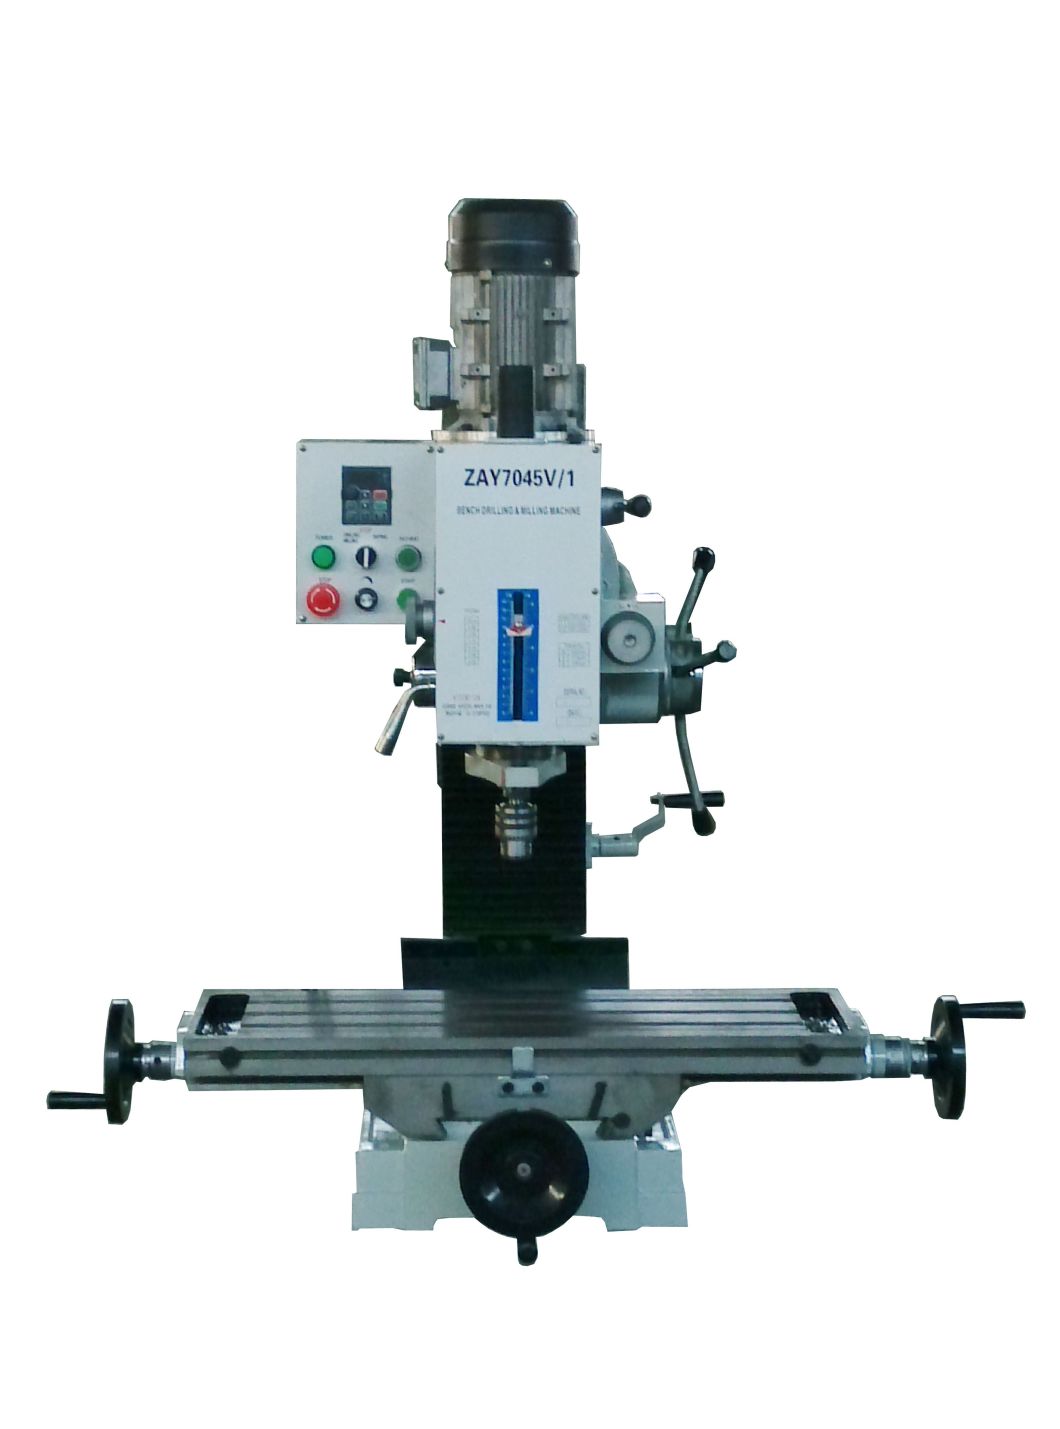 Bench metal working machine Zay 7045V/1 for gearing with CE